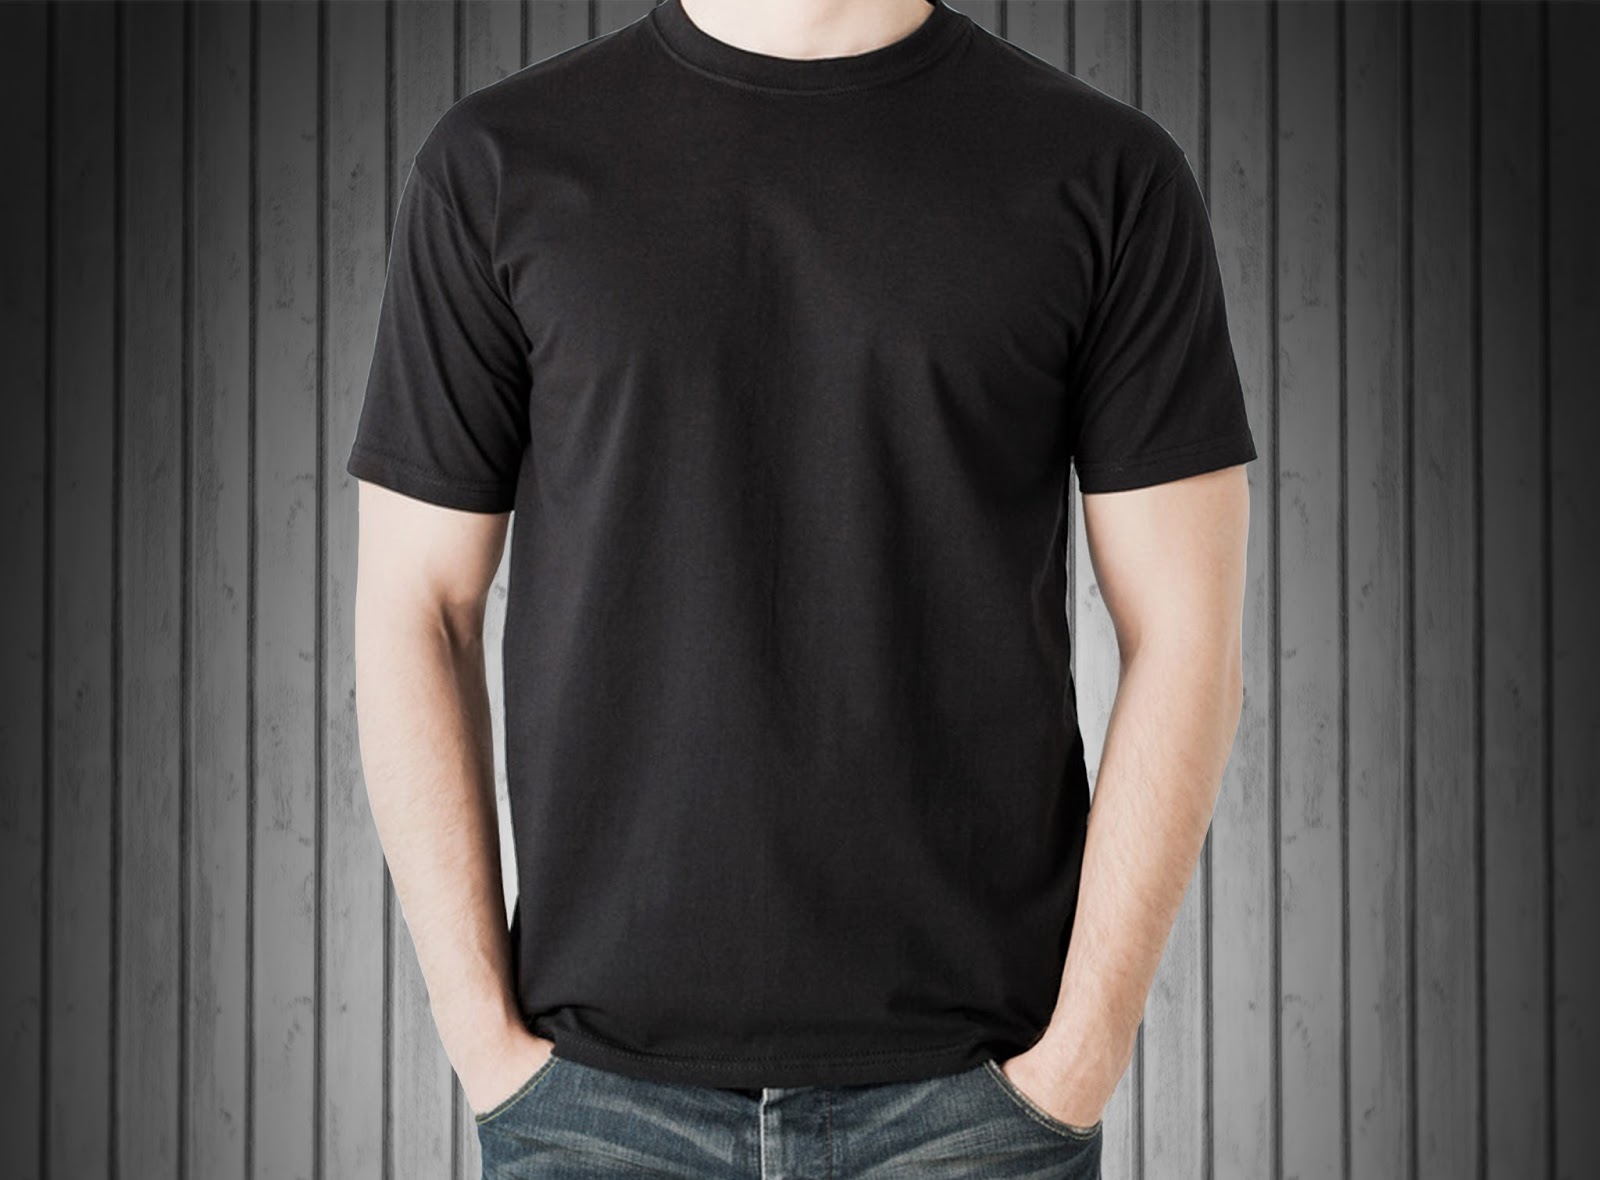 T shirt templates for photoshop free - sonicmilo